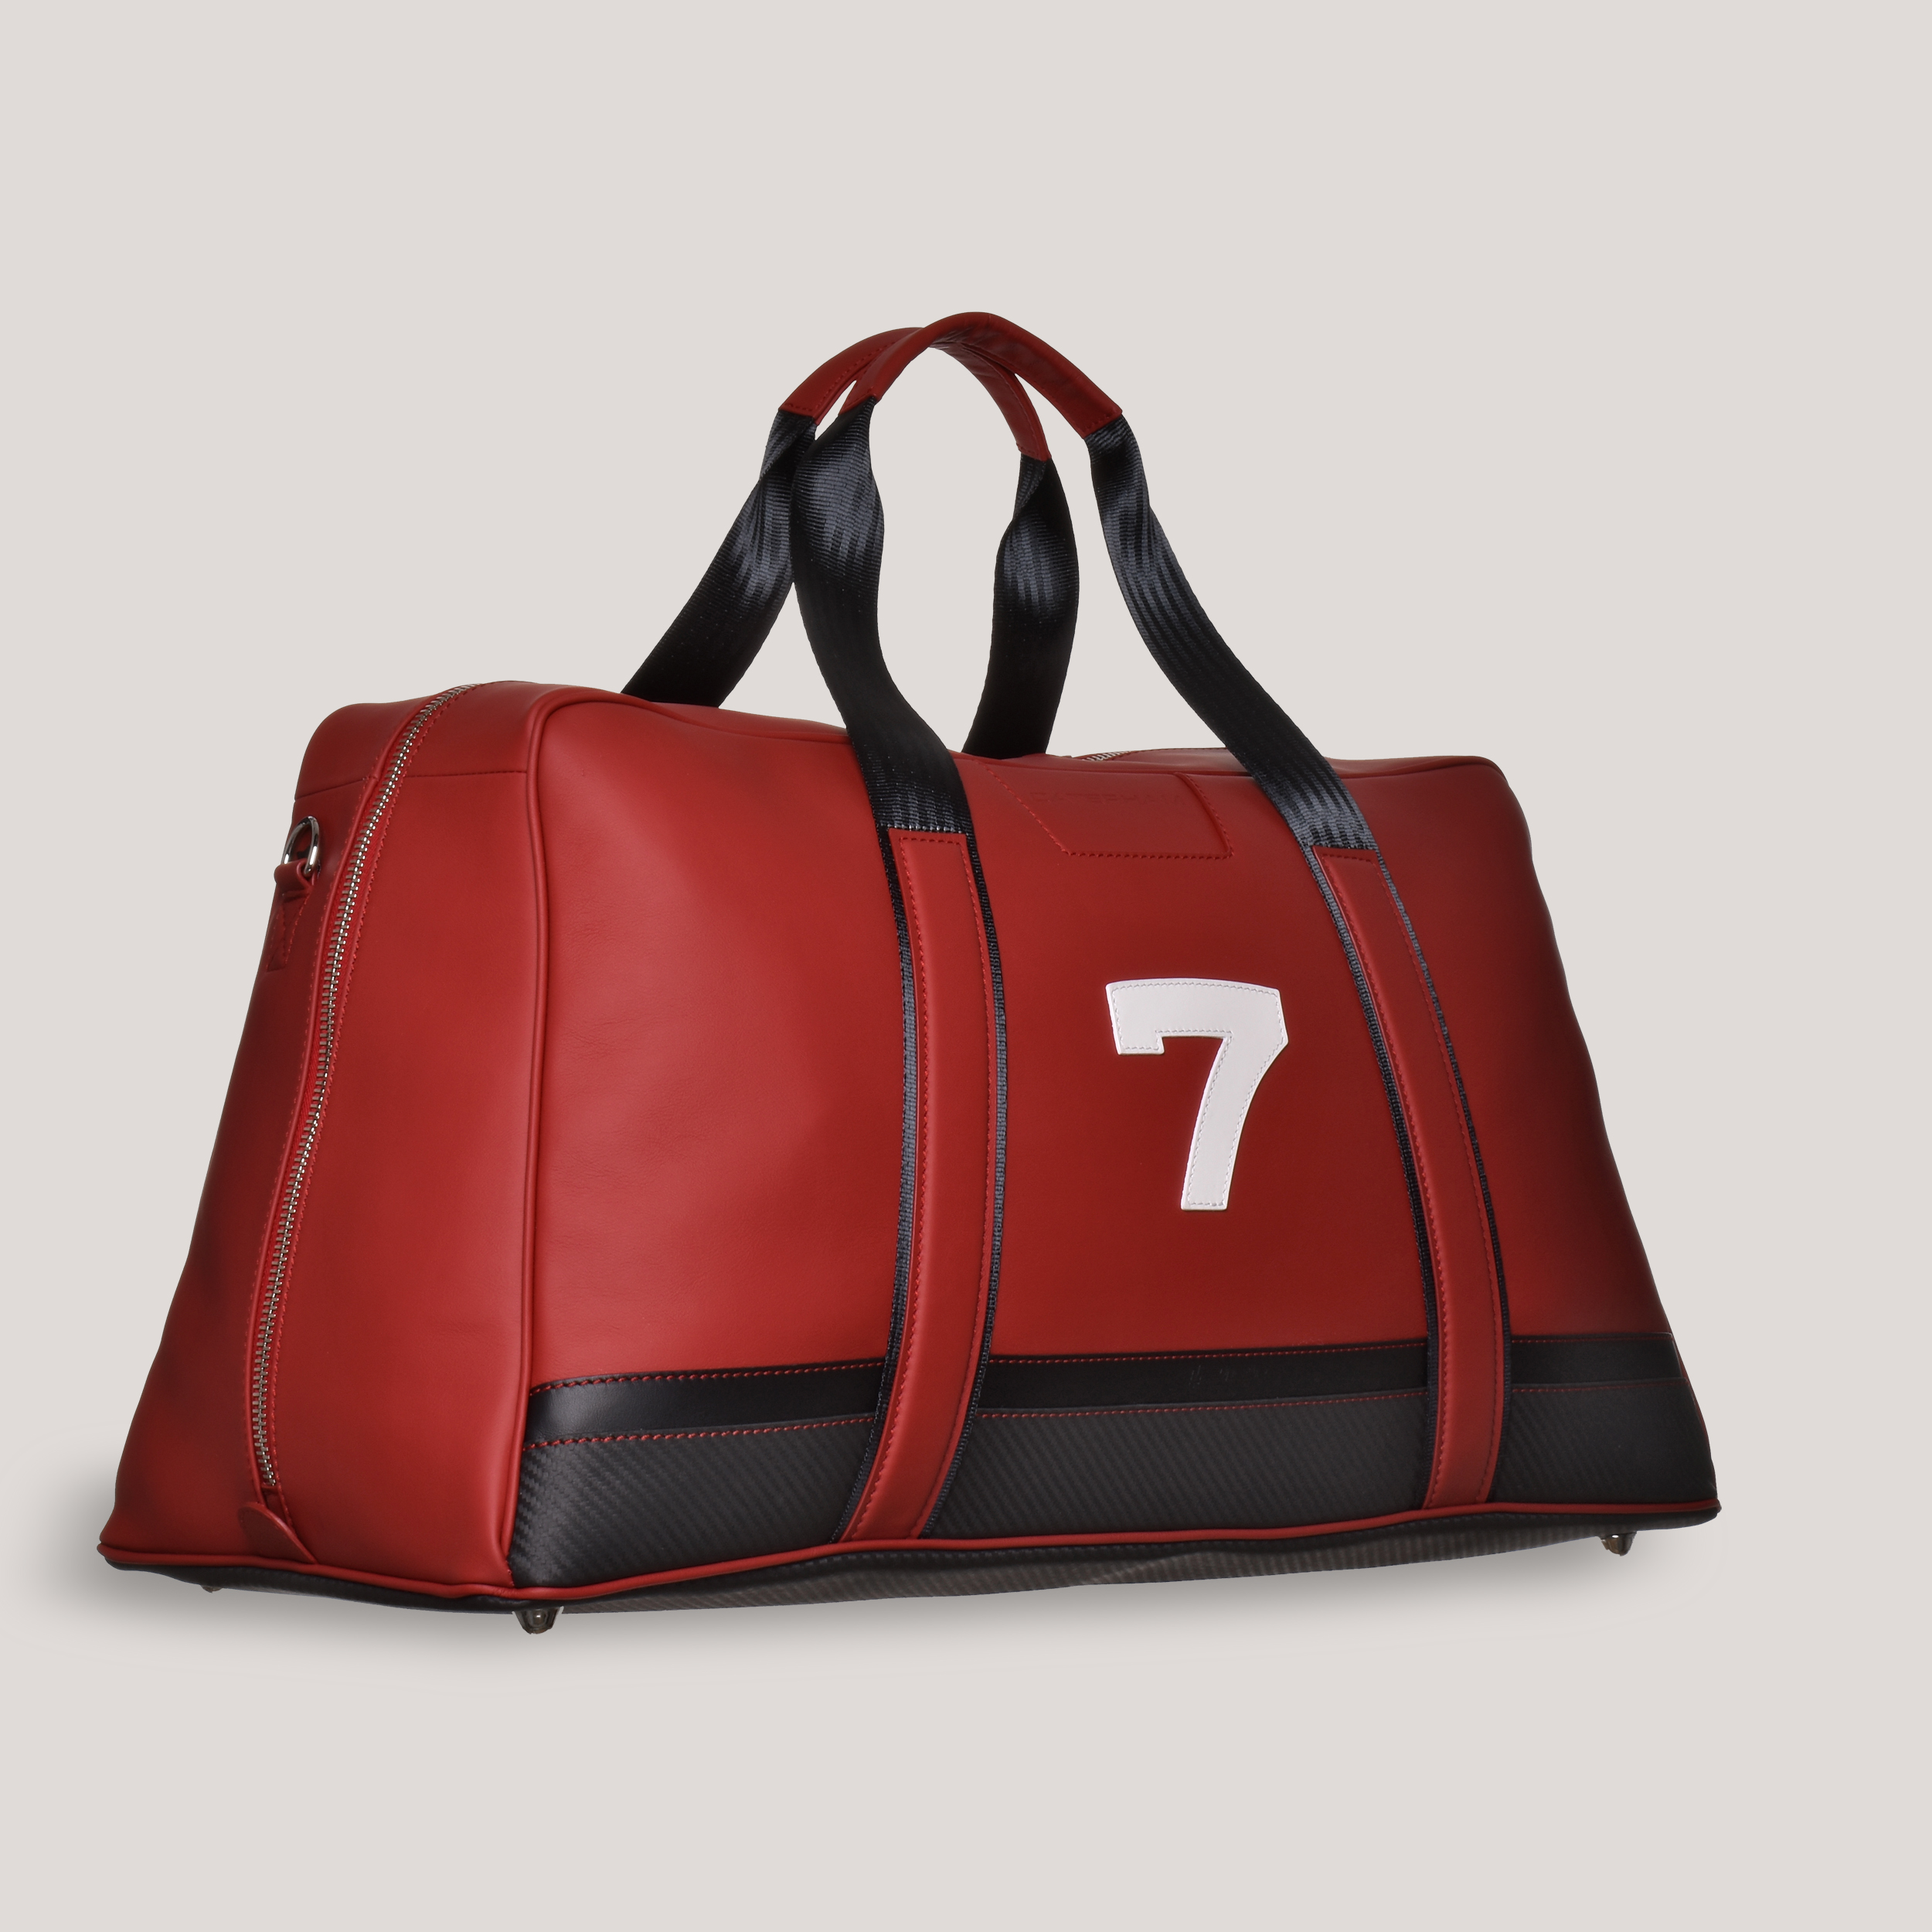 gto holdall caterham red7 angle